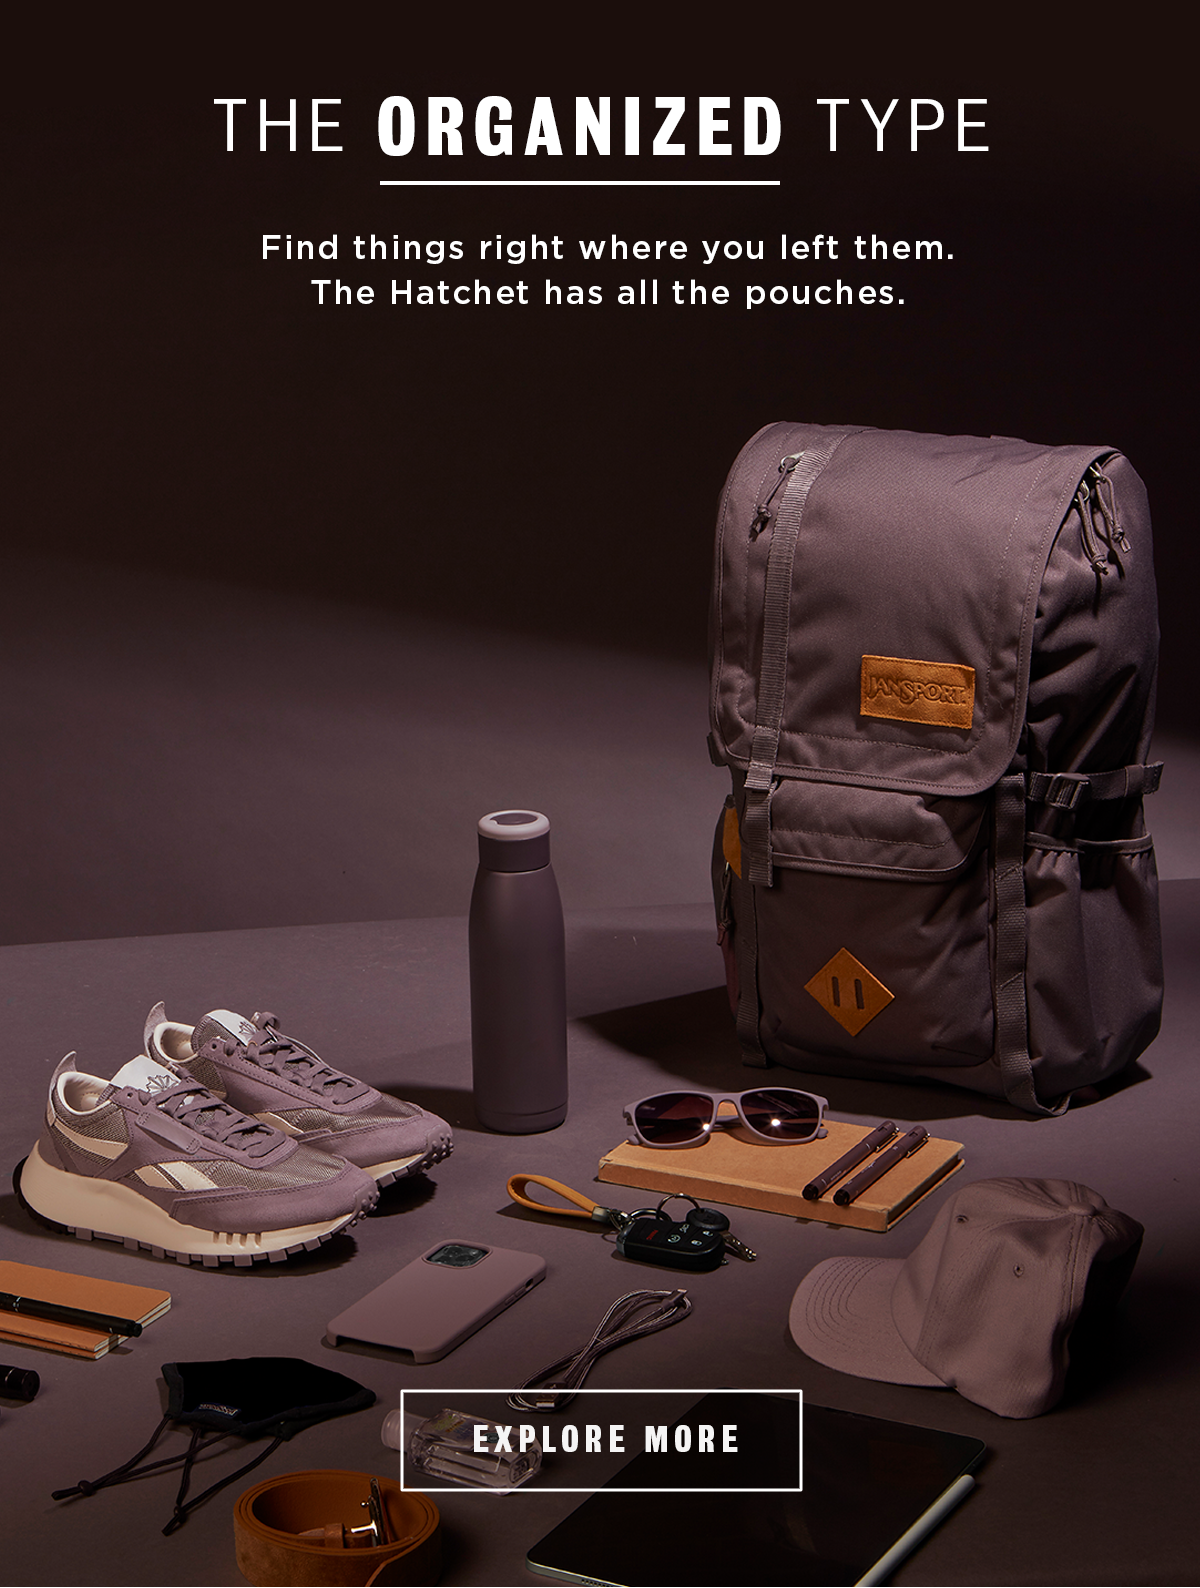 THE ORGANIZED TYPE Find things right where you left them. The Hatchet has all the pouches. EXPLORE MORE